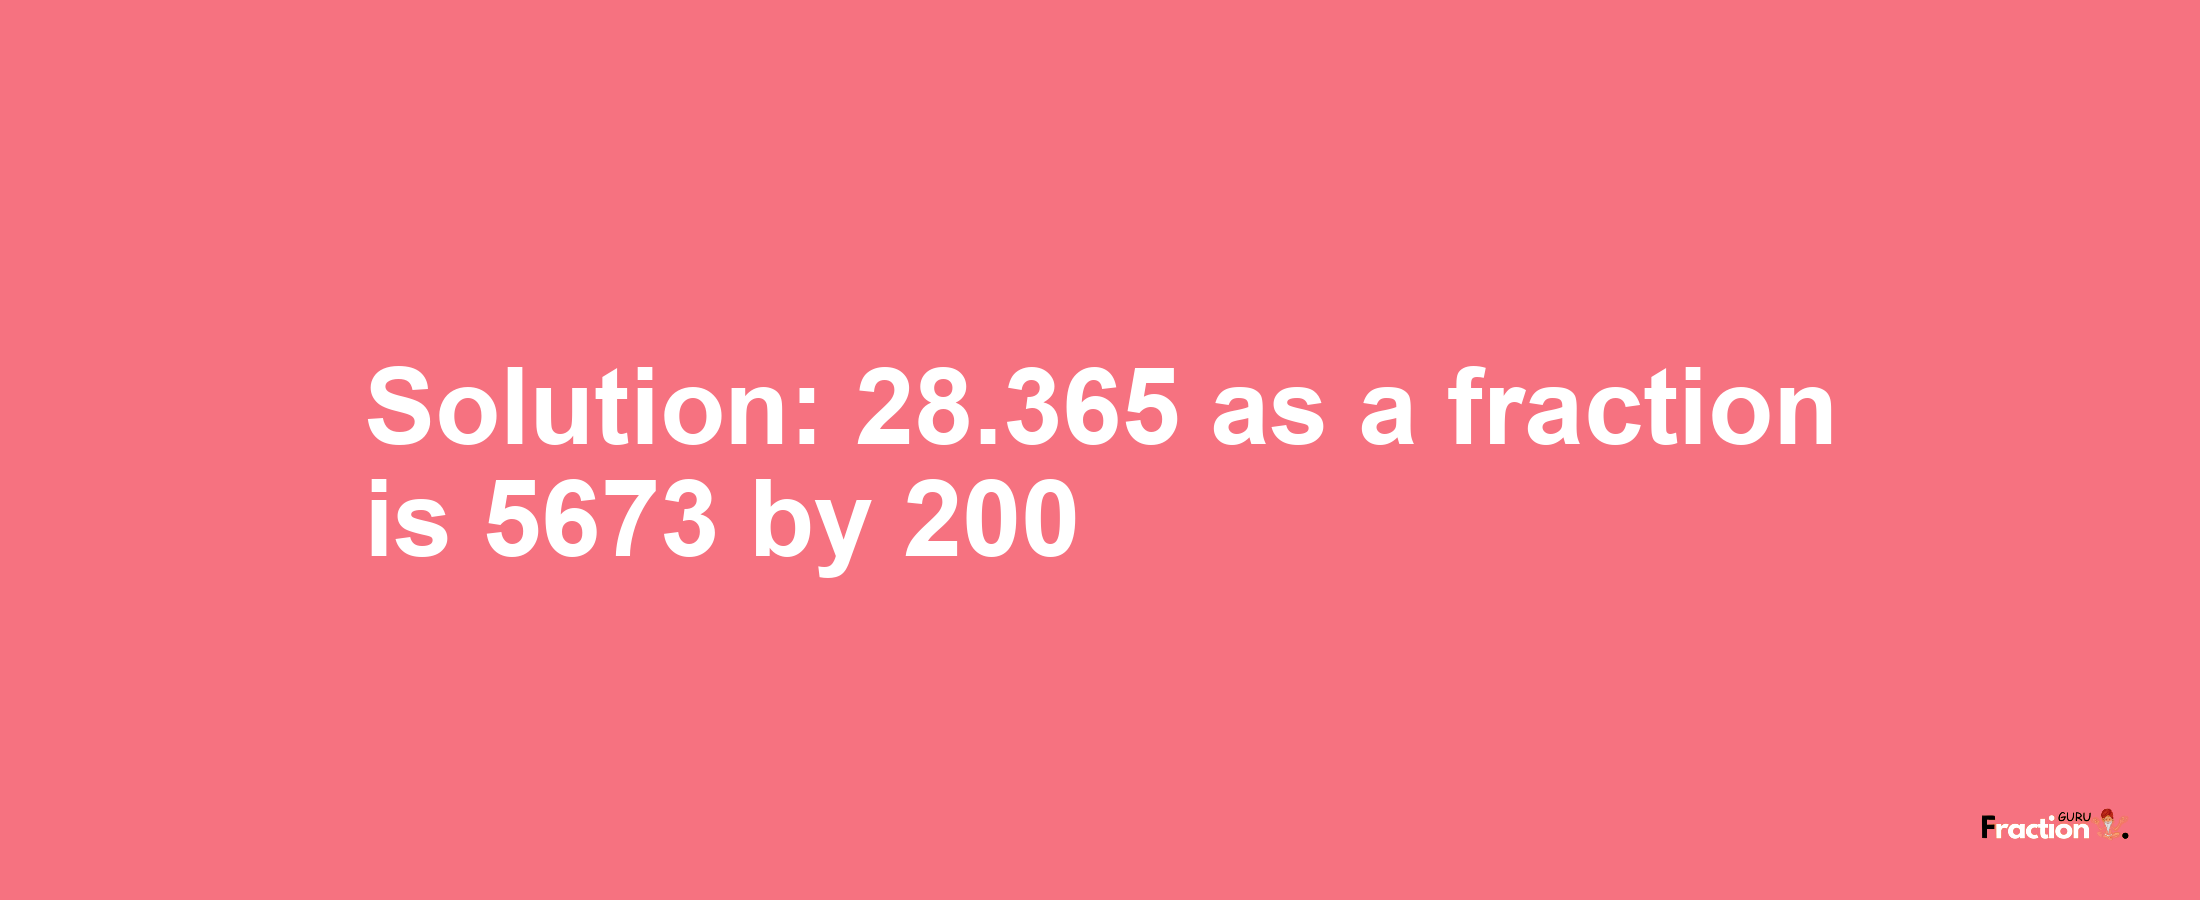 Solution:28.365 as a fraction is 5673/200